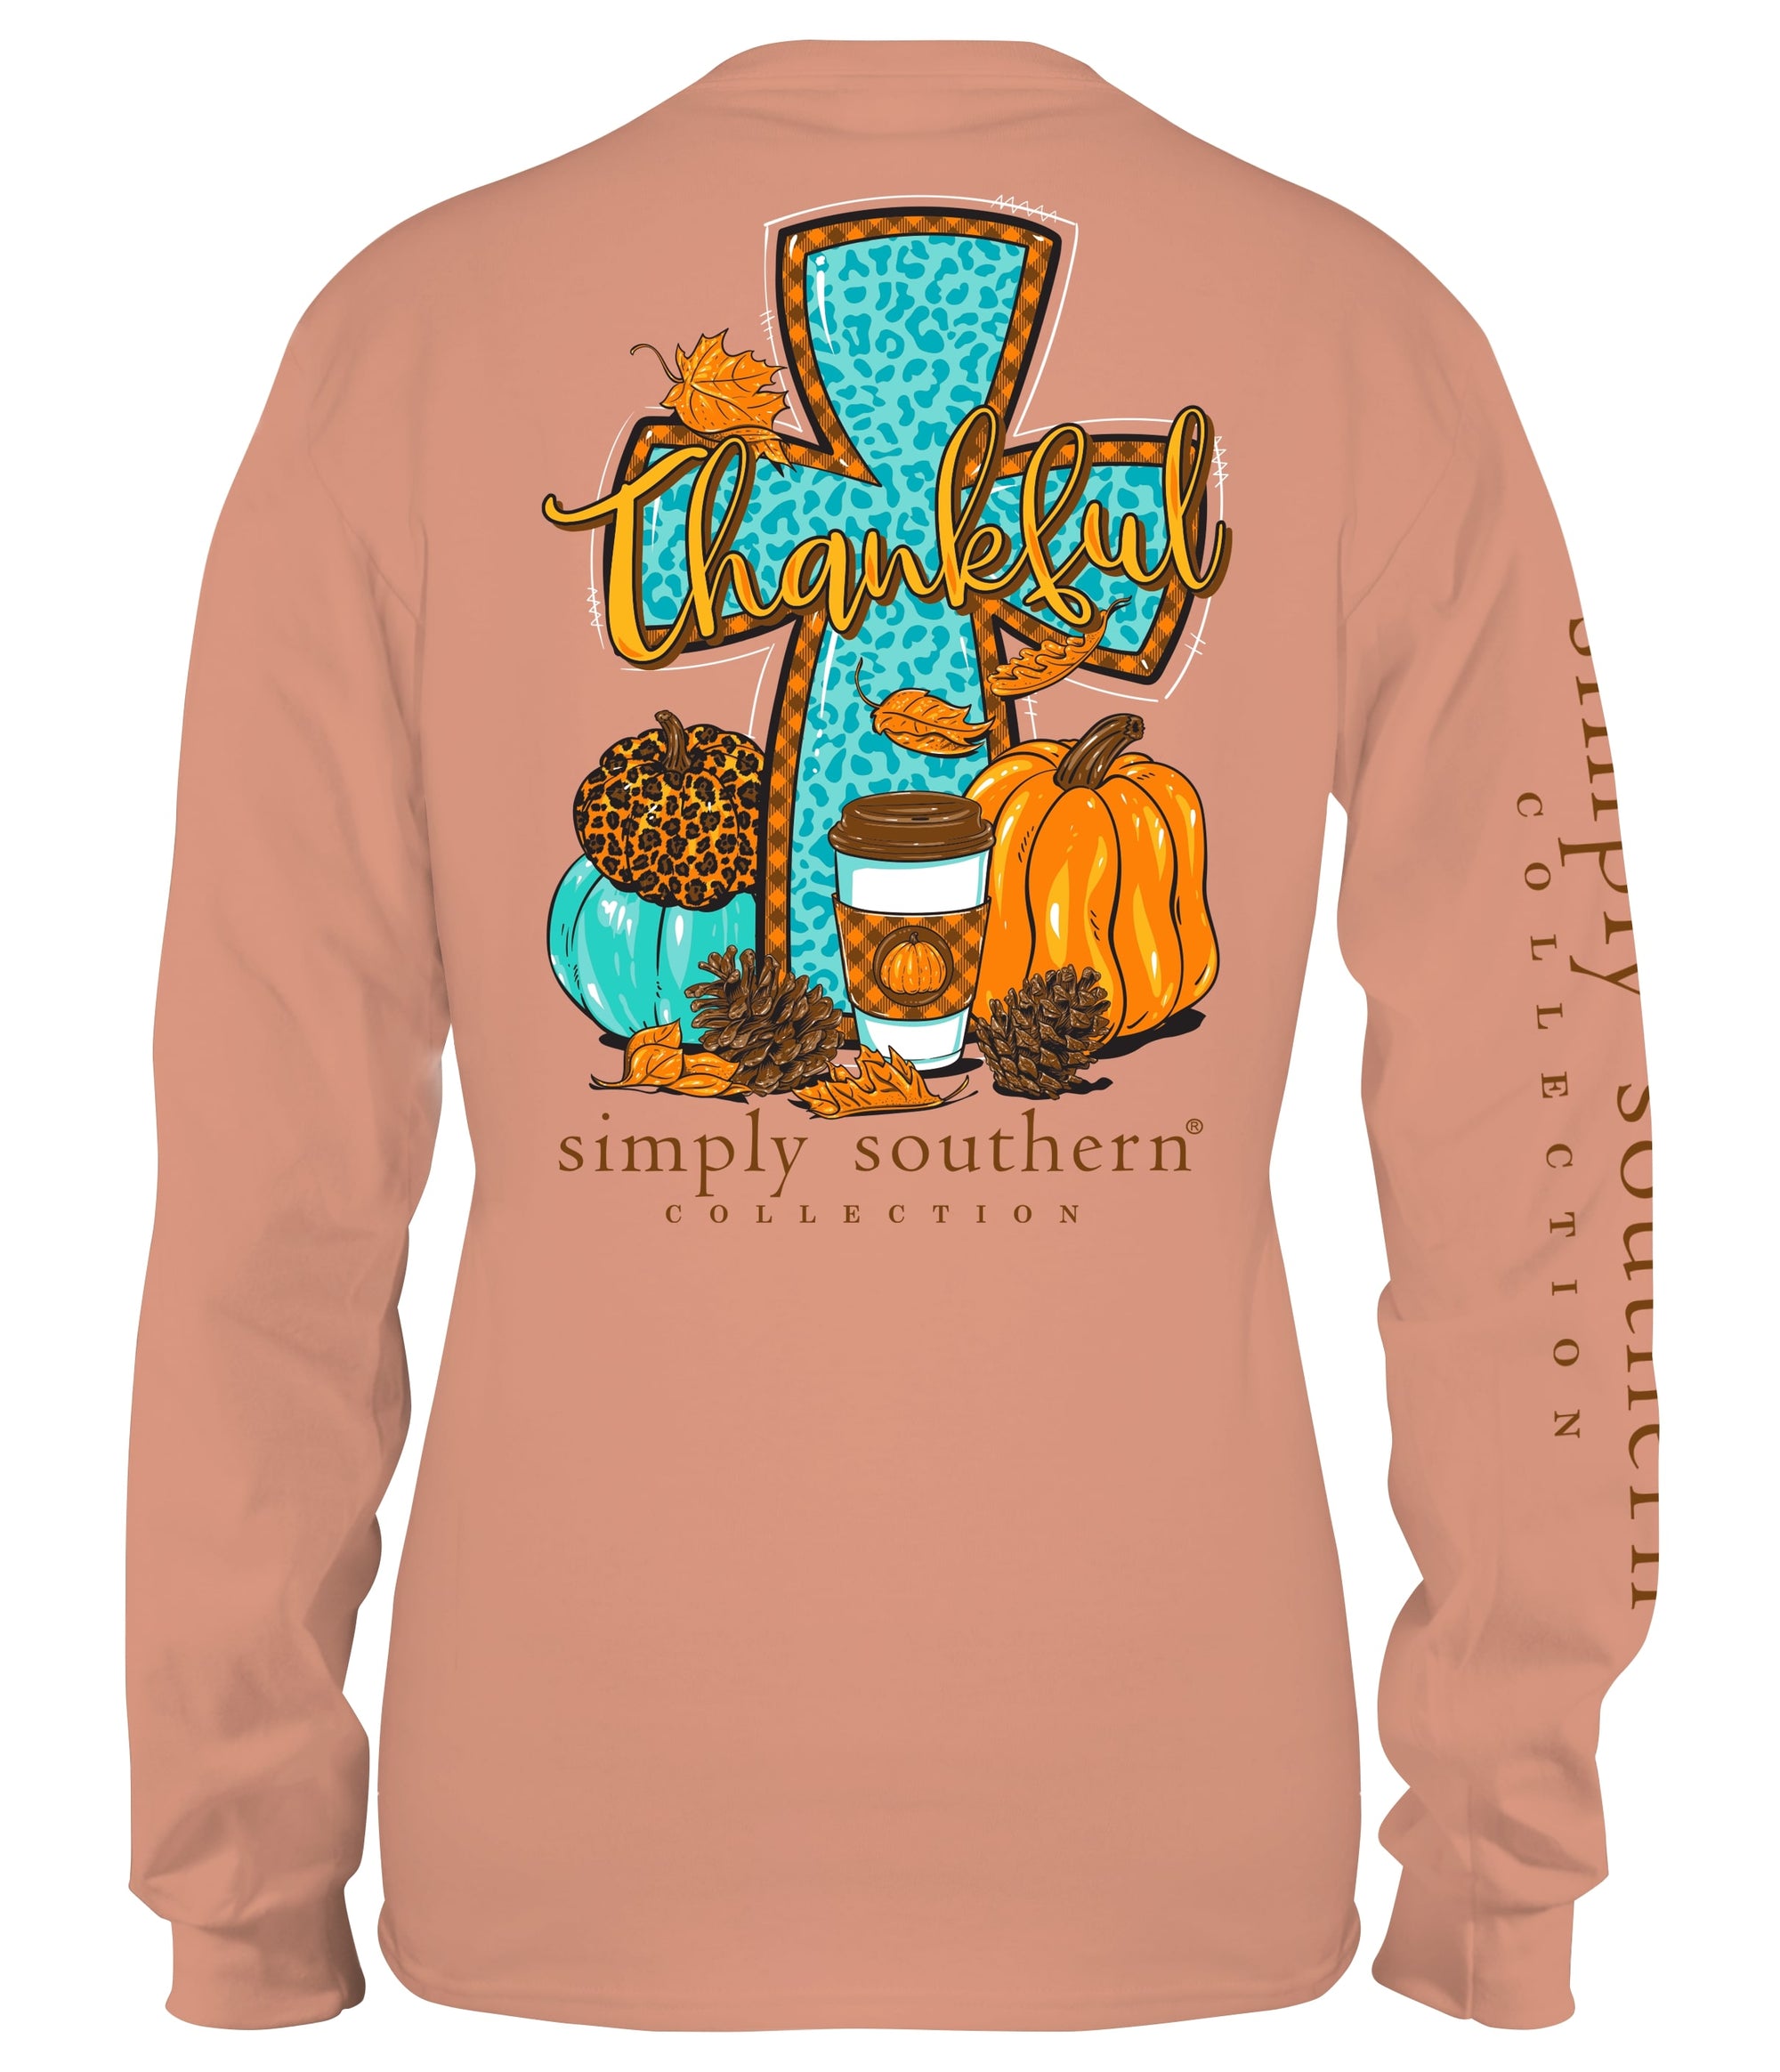 pensacola florida boutique shopping online simply southern graphic tee fall thankful cross pumpkin coffee fall simply southern